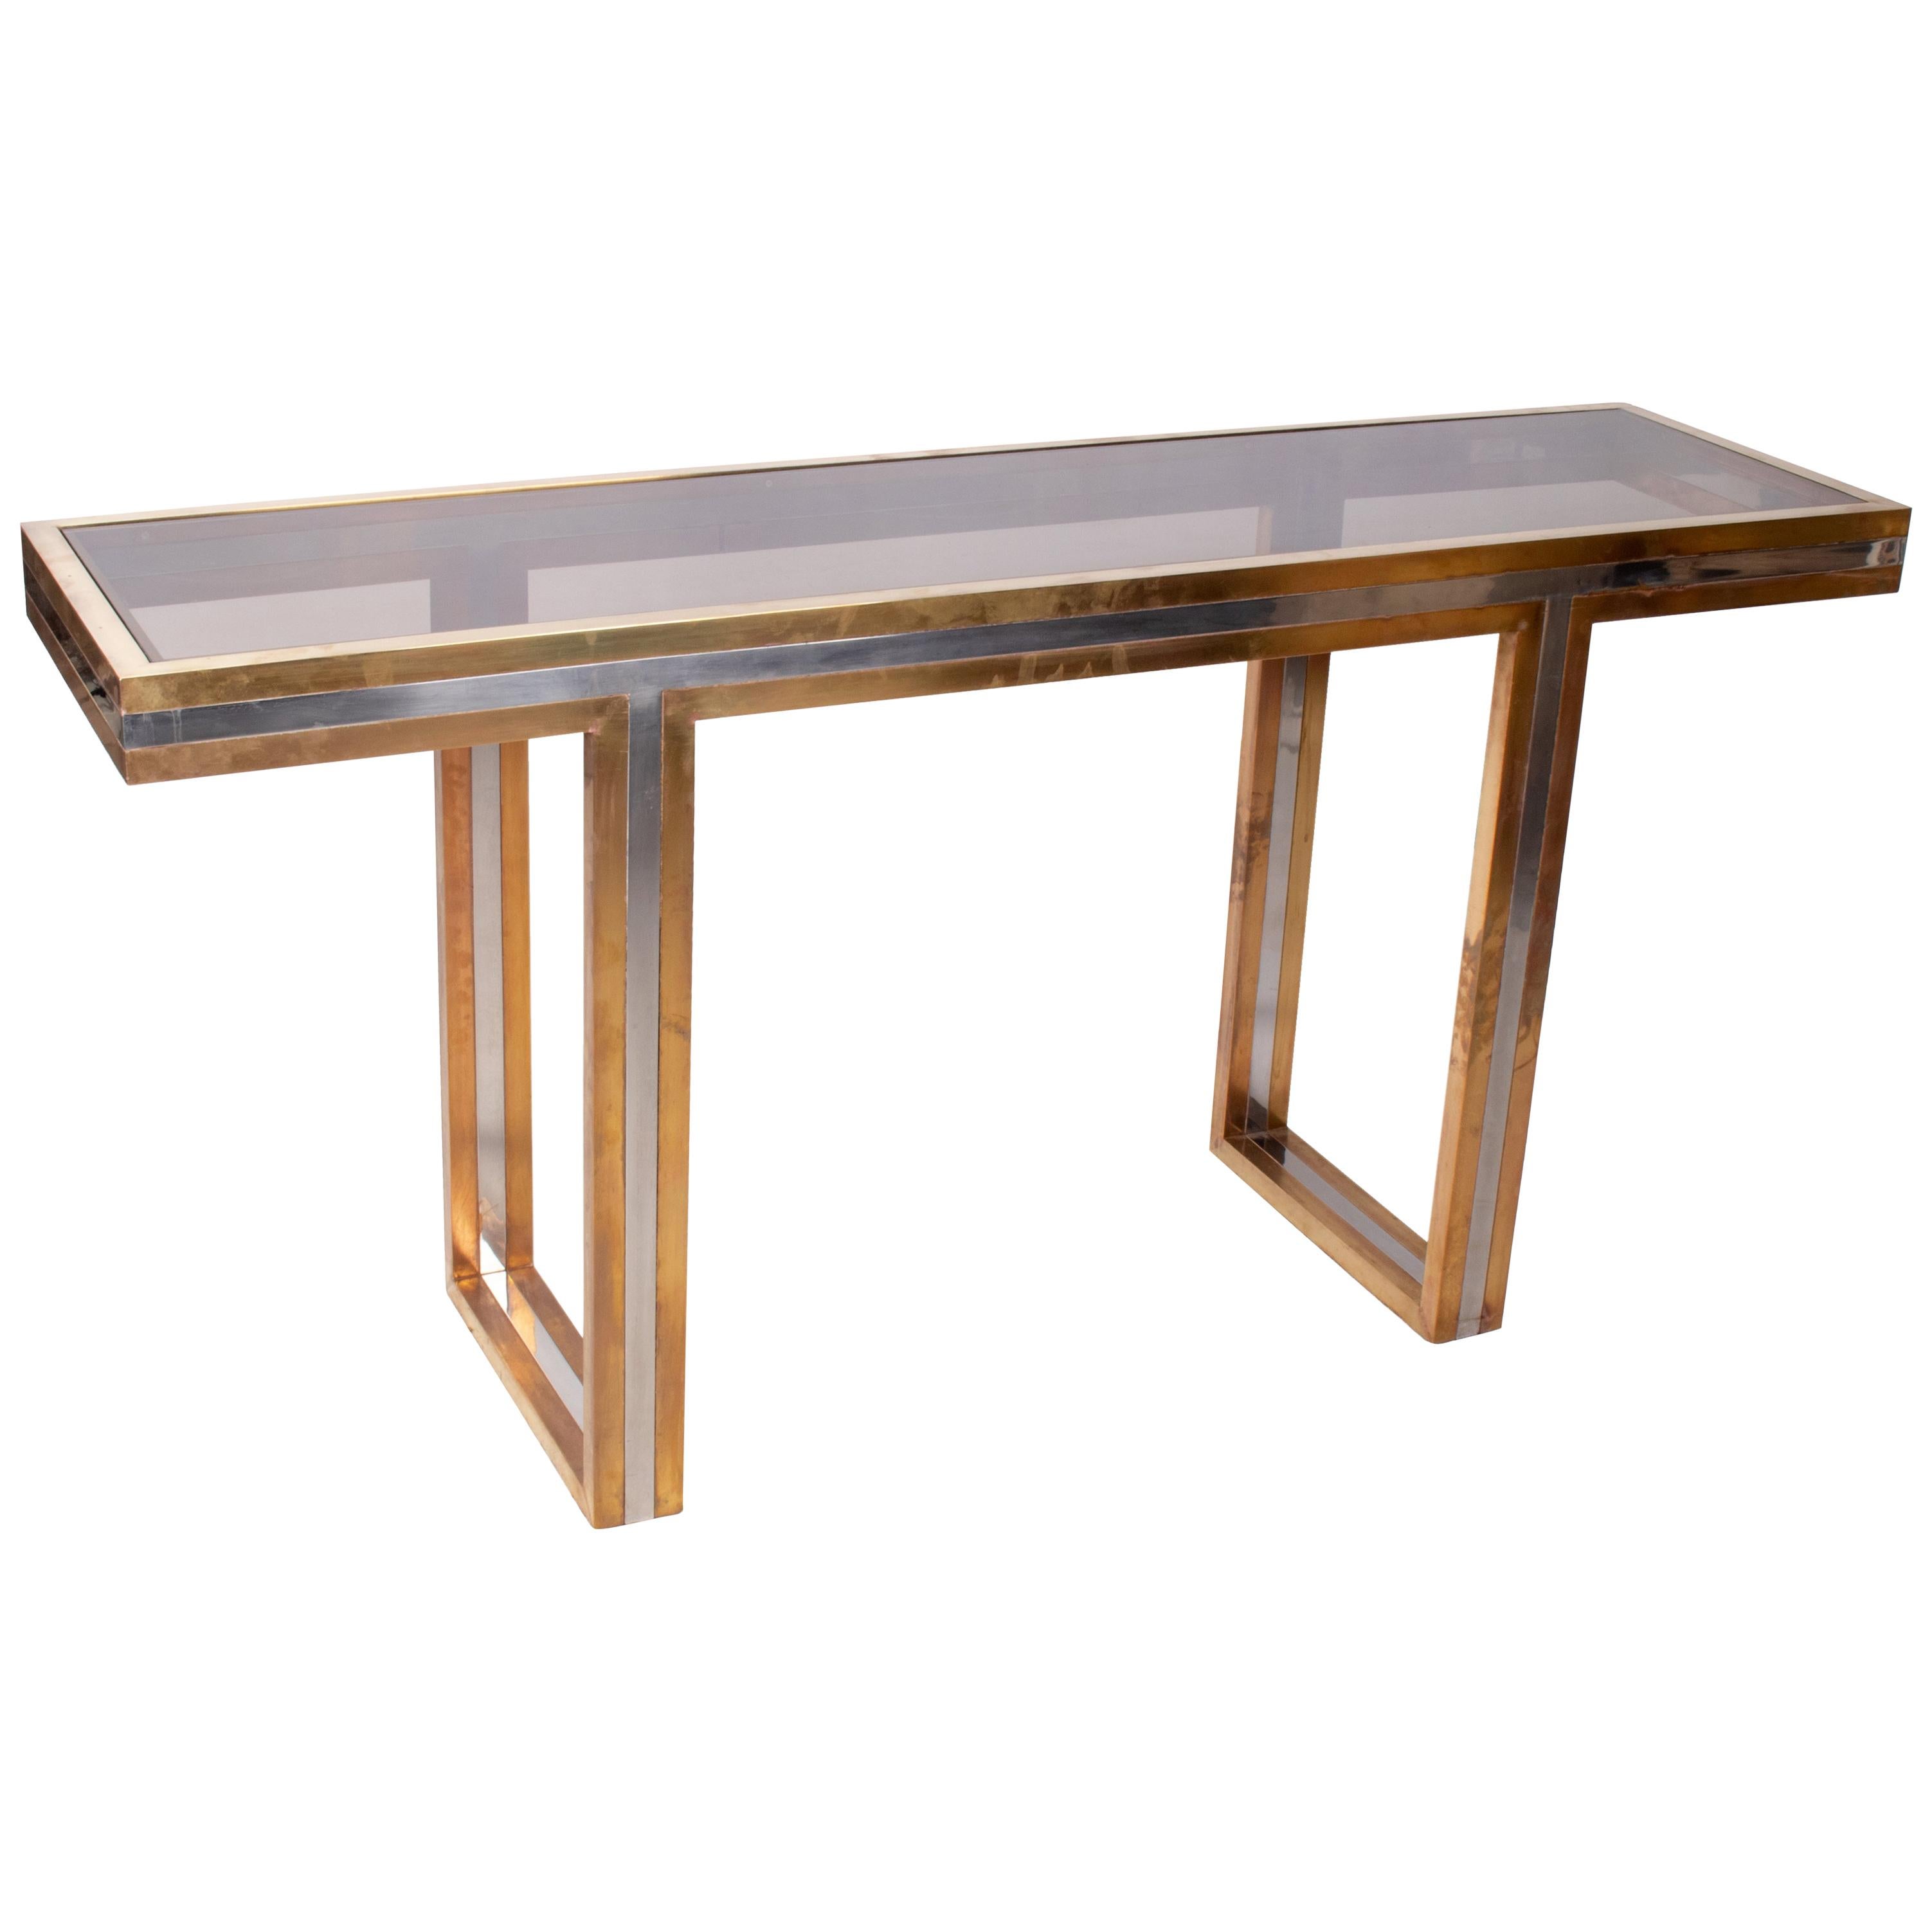 1970s European Willy Rizzo Two-Tone Brass Console Table with Glass Top